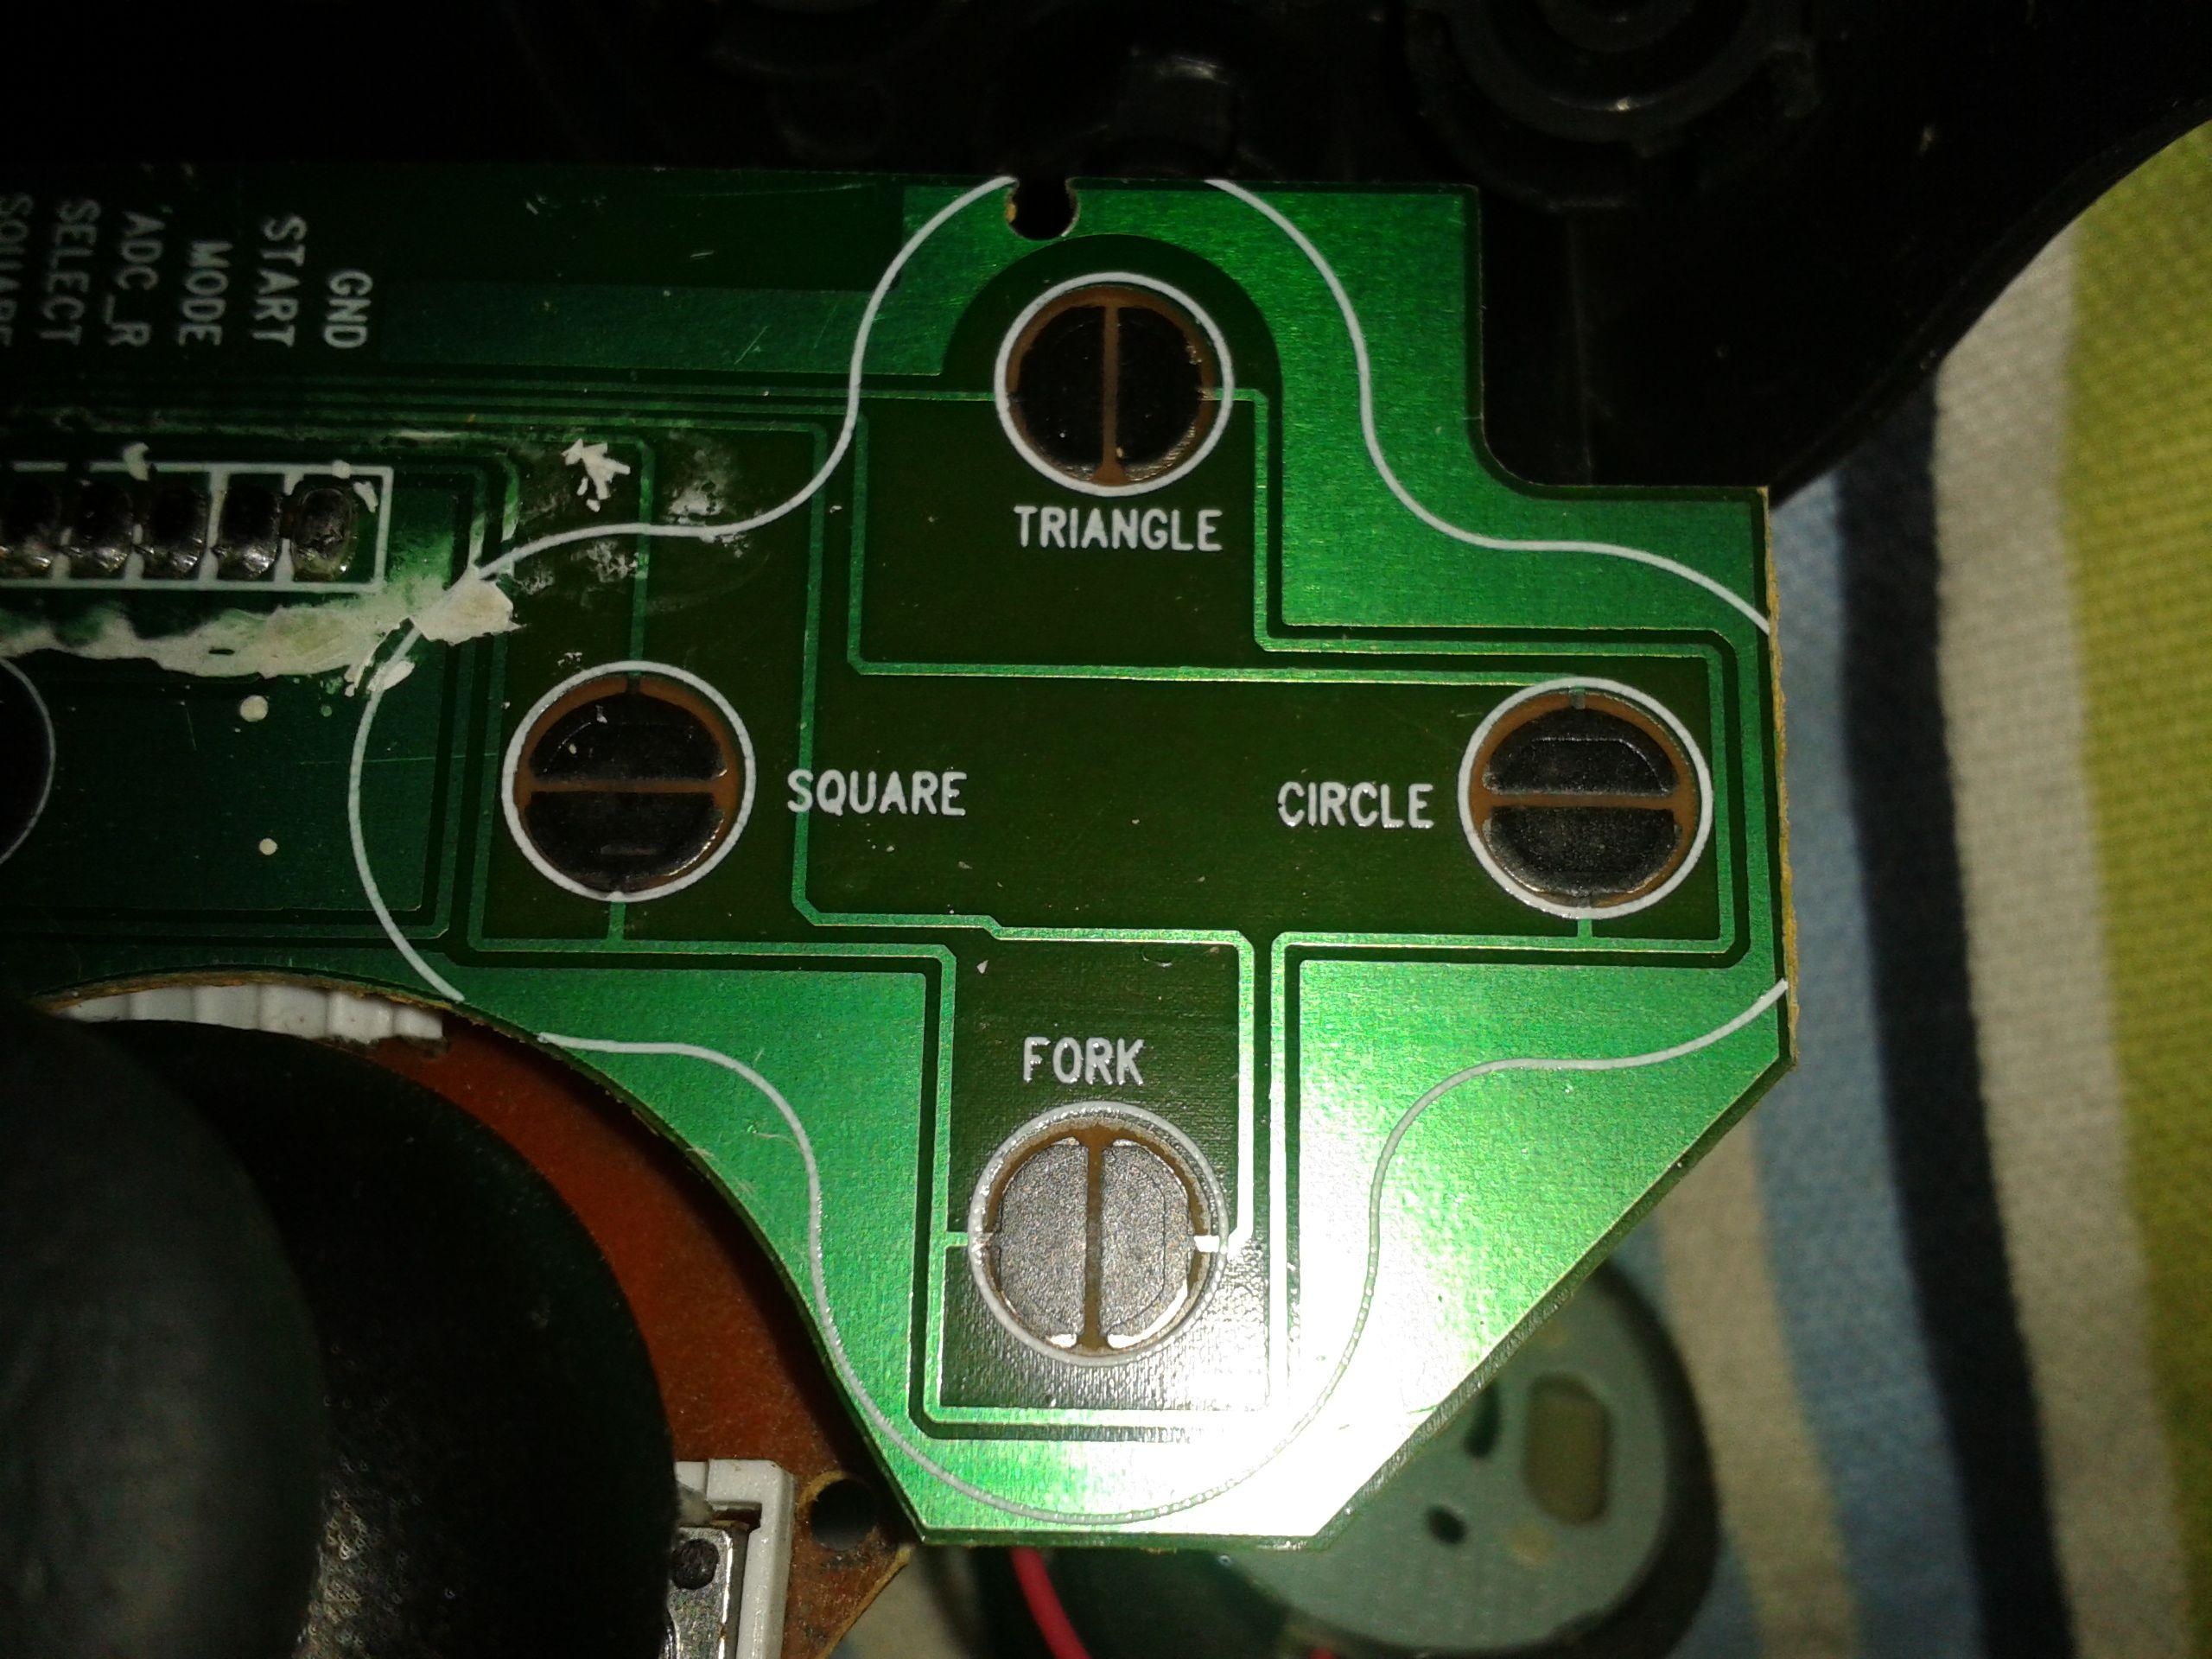 Triangles and Green Square Logo - Square, triangle, circle....fork? : gaming